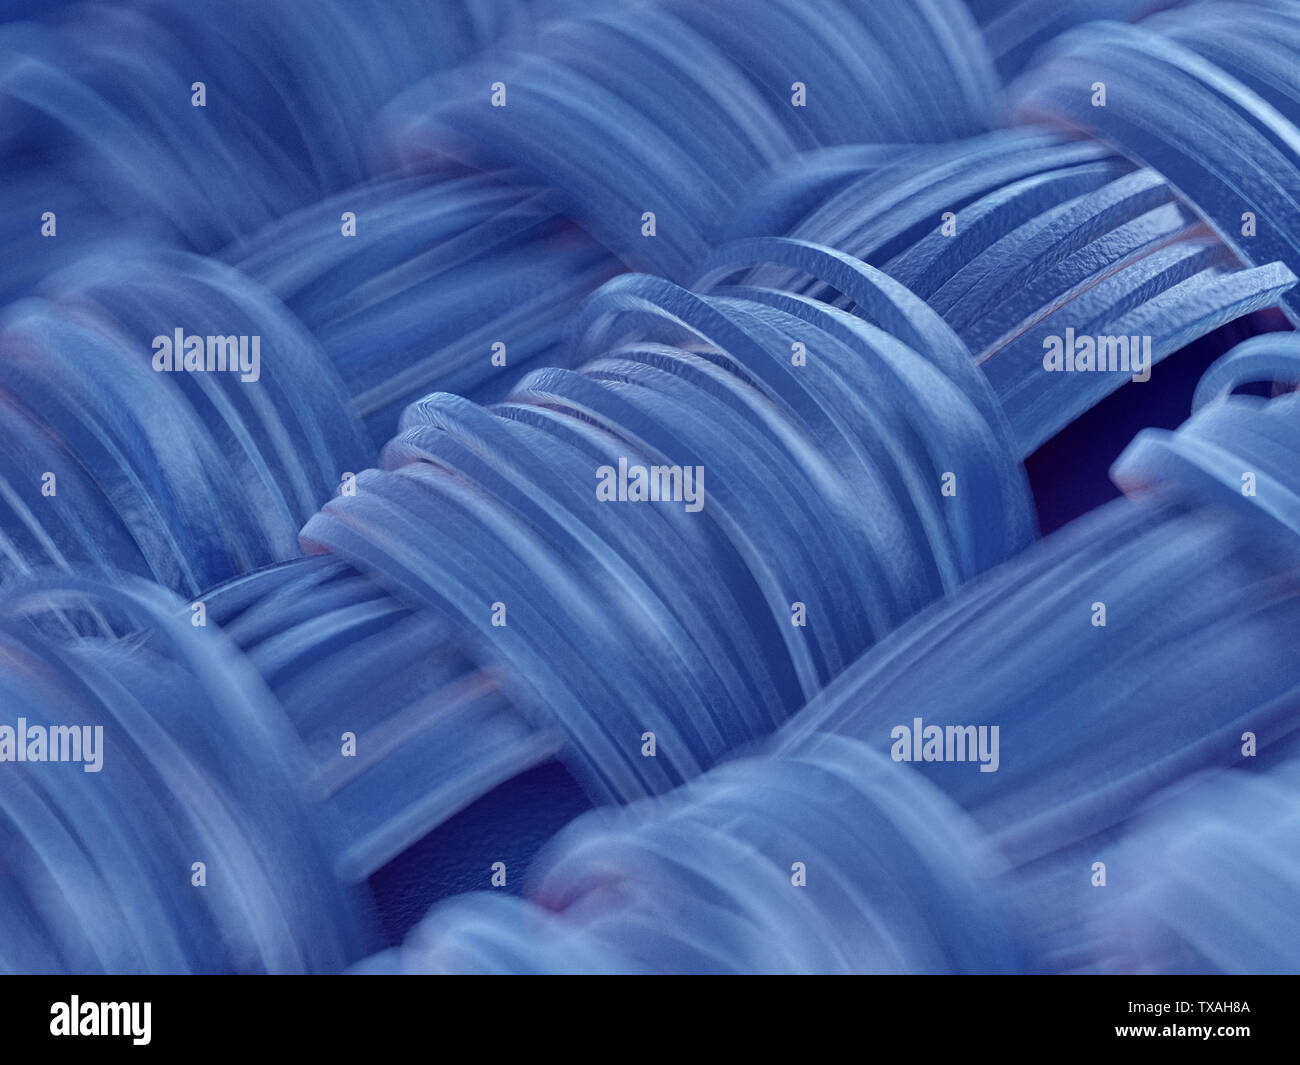 3d rendered illustration of a microscopic view of fabric Stock Photo